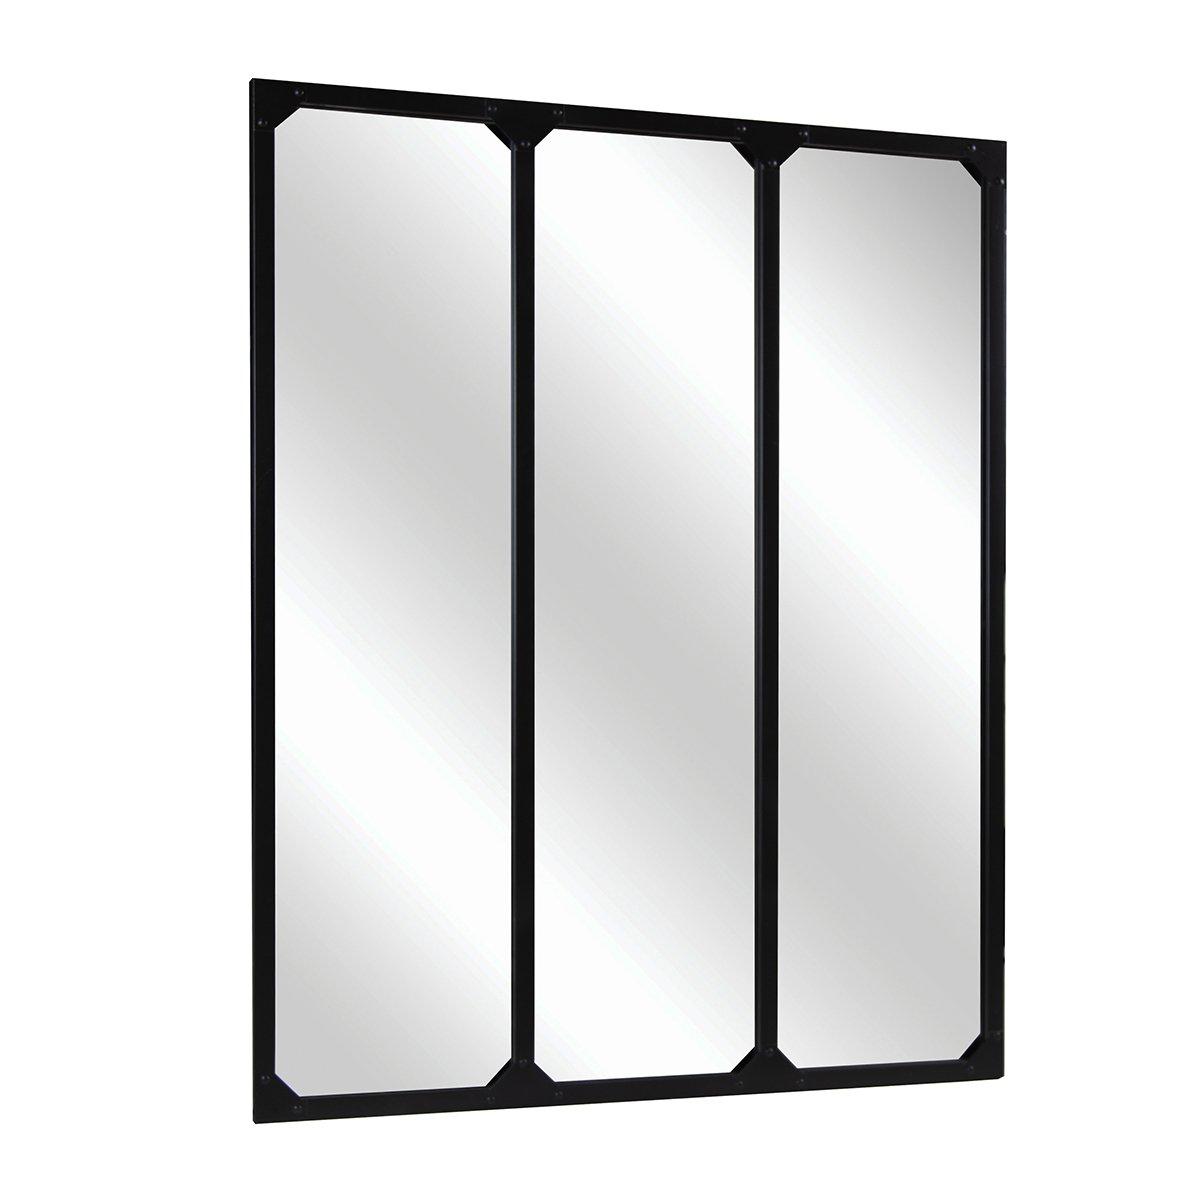 Large Industrial Urban Wrought Iron Square Panel Mirror 95x120cm